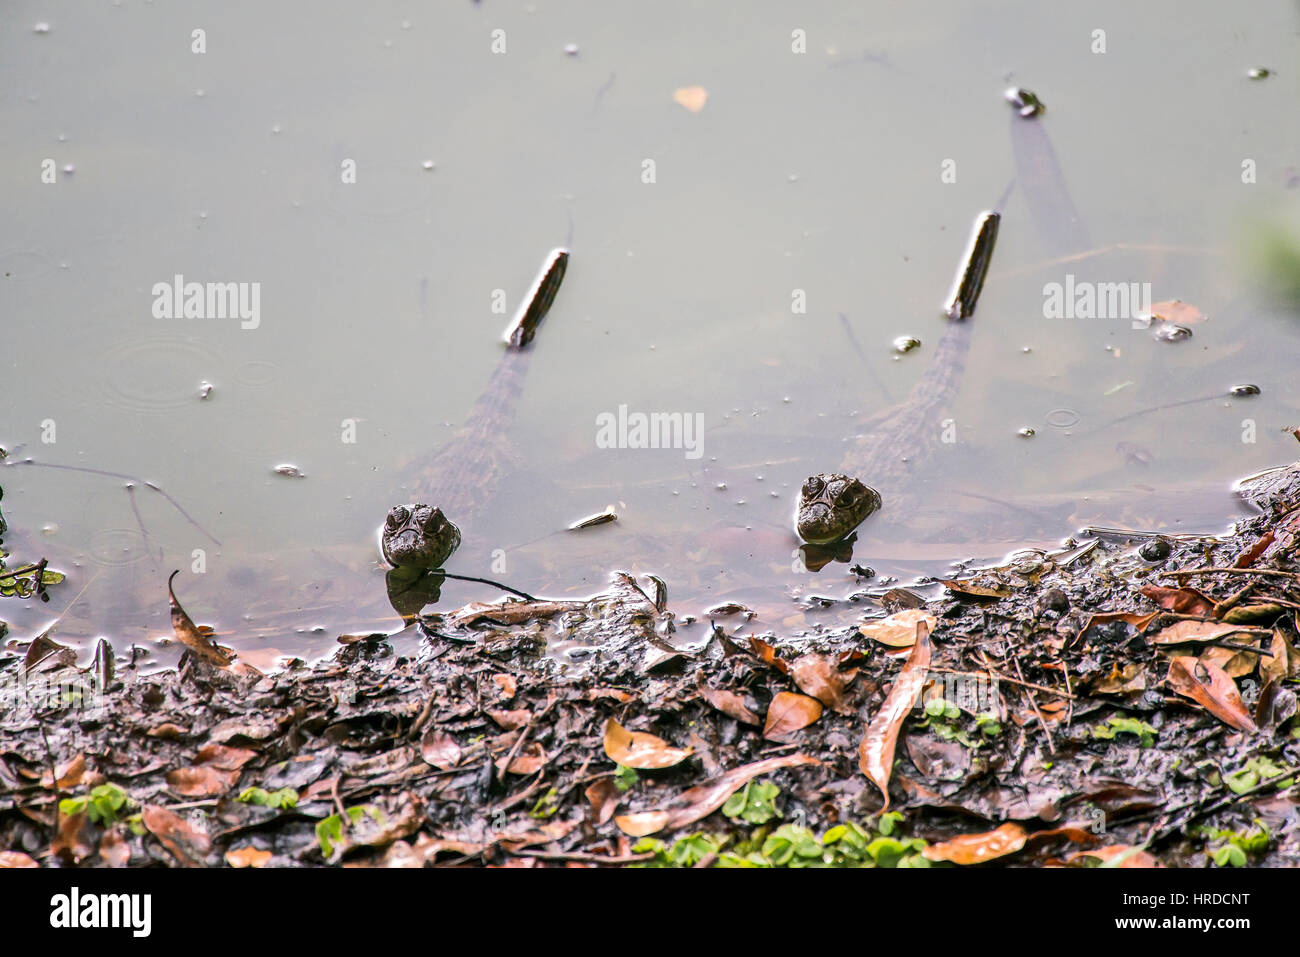 Baby Broad-snouted caiman (Caiman latirostris), photographed in Espírito Santo, Brazil. Atlântic forest biome. Stock Photo